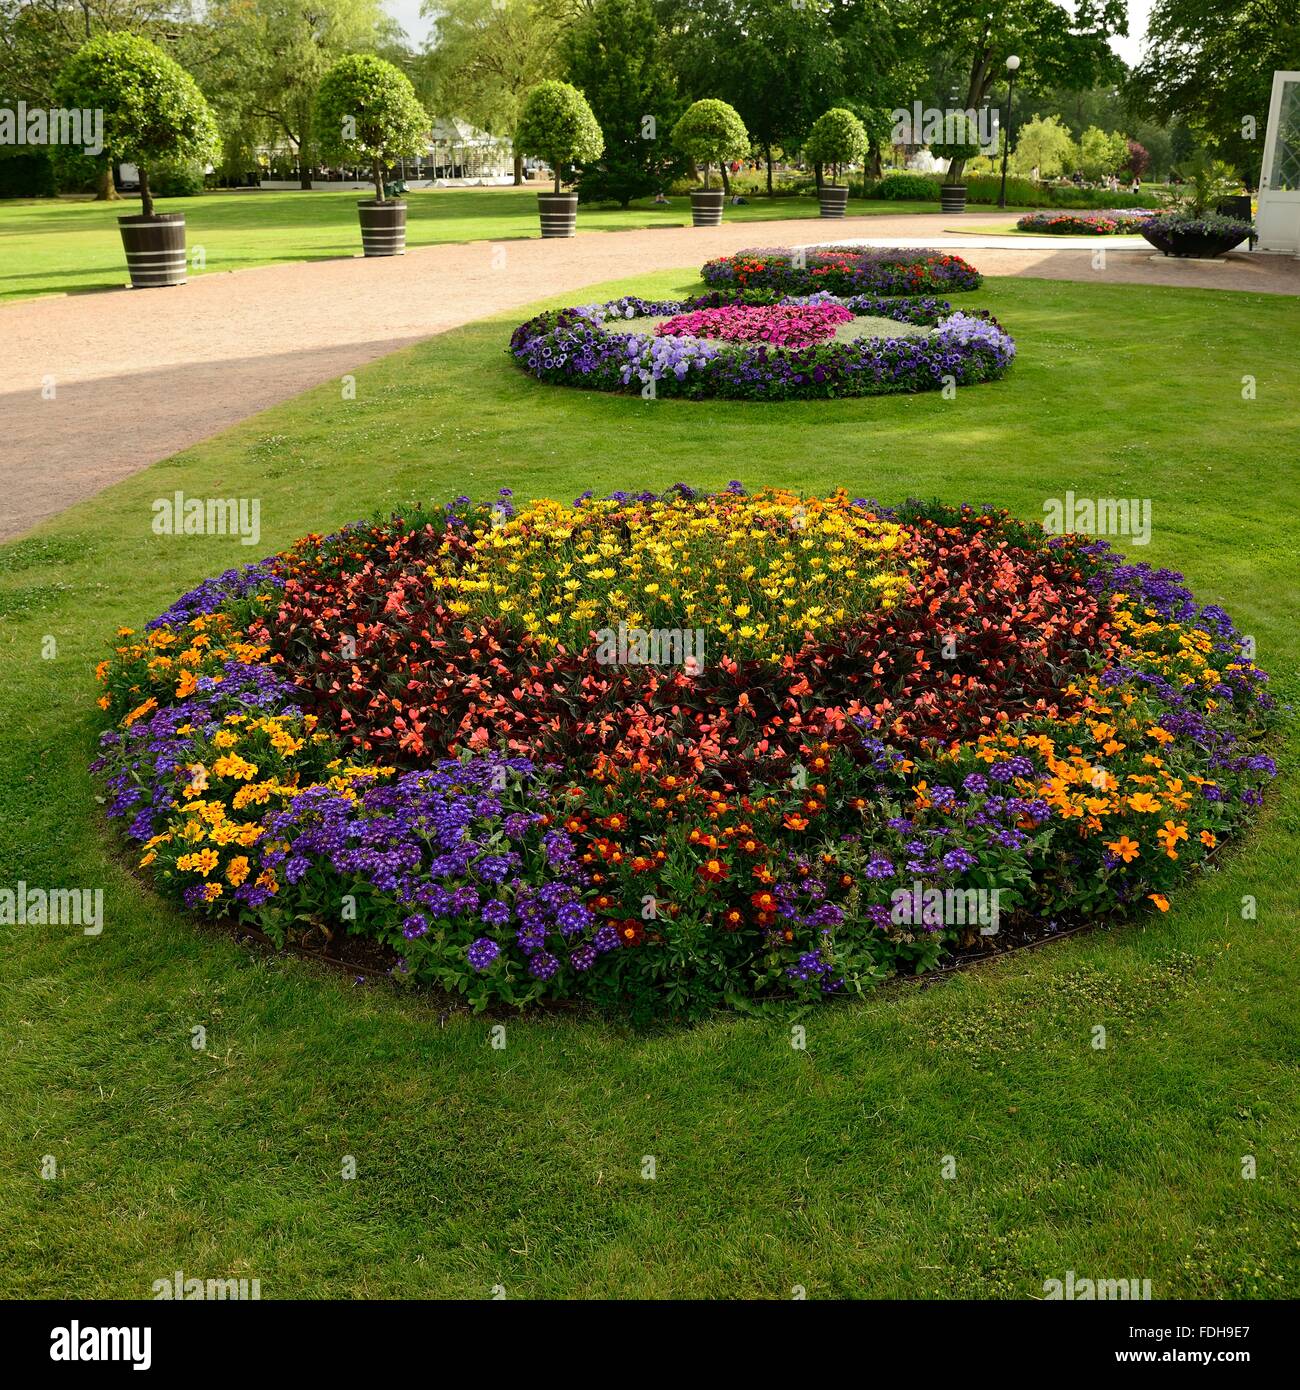 Flowerbed in park Stock Photo